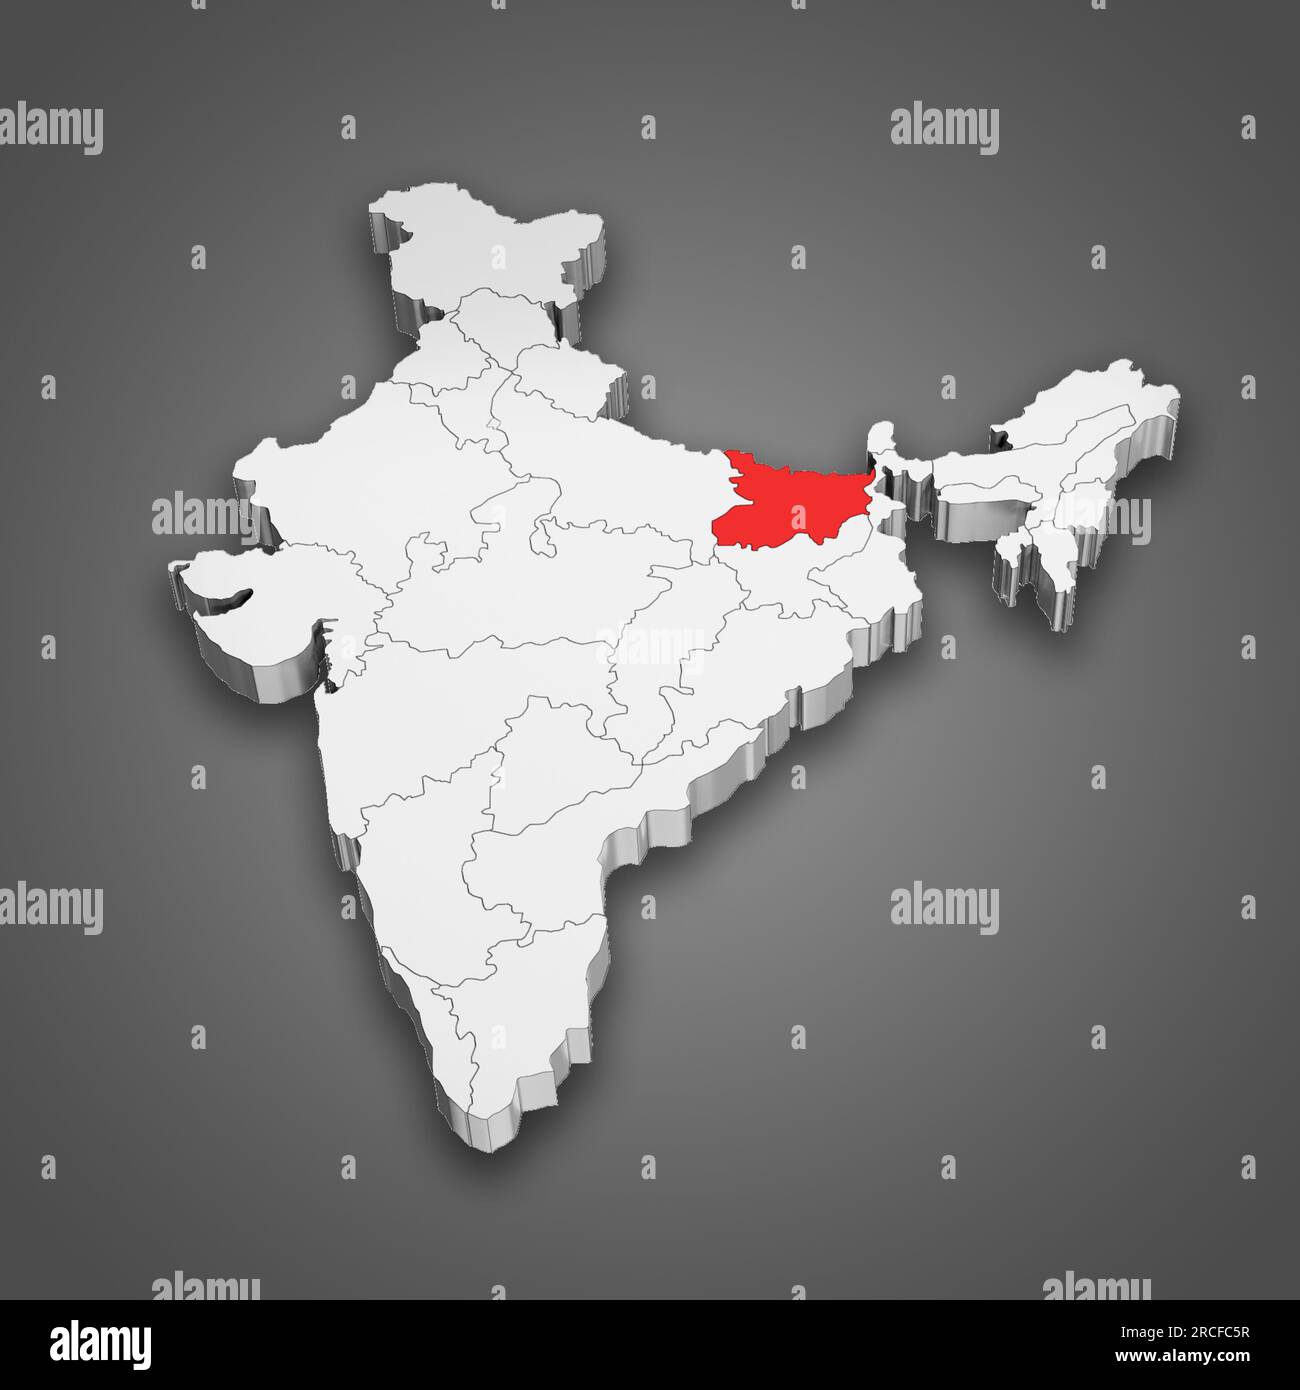 Bihar state location within India map. 3D Illustration Stock Photo